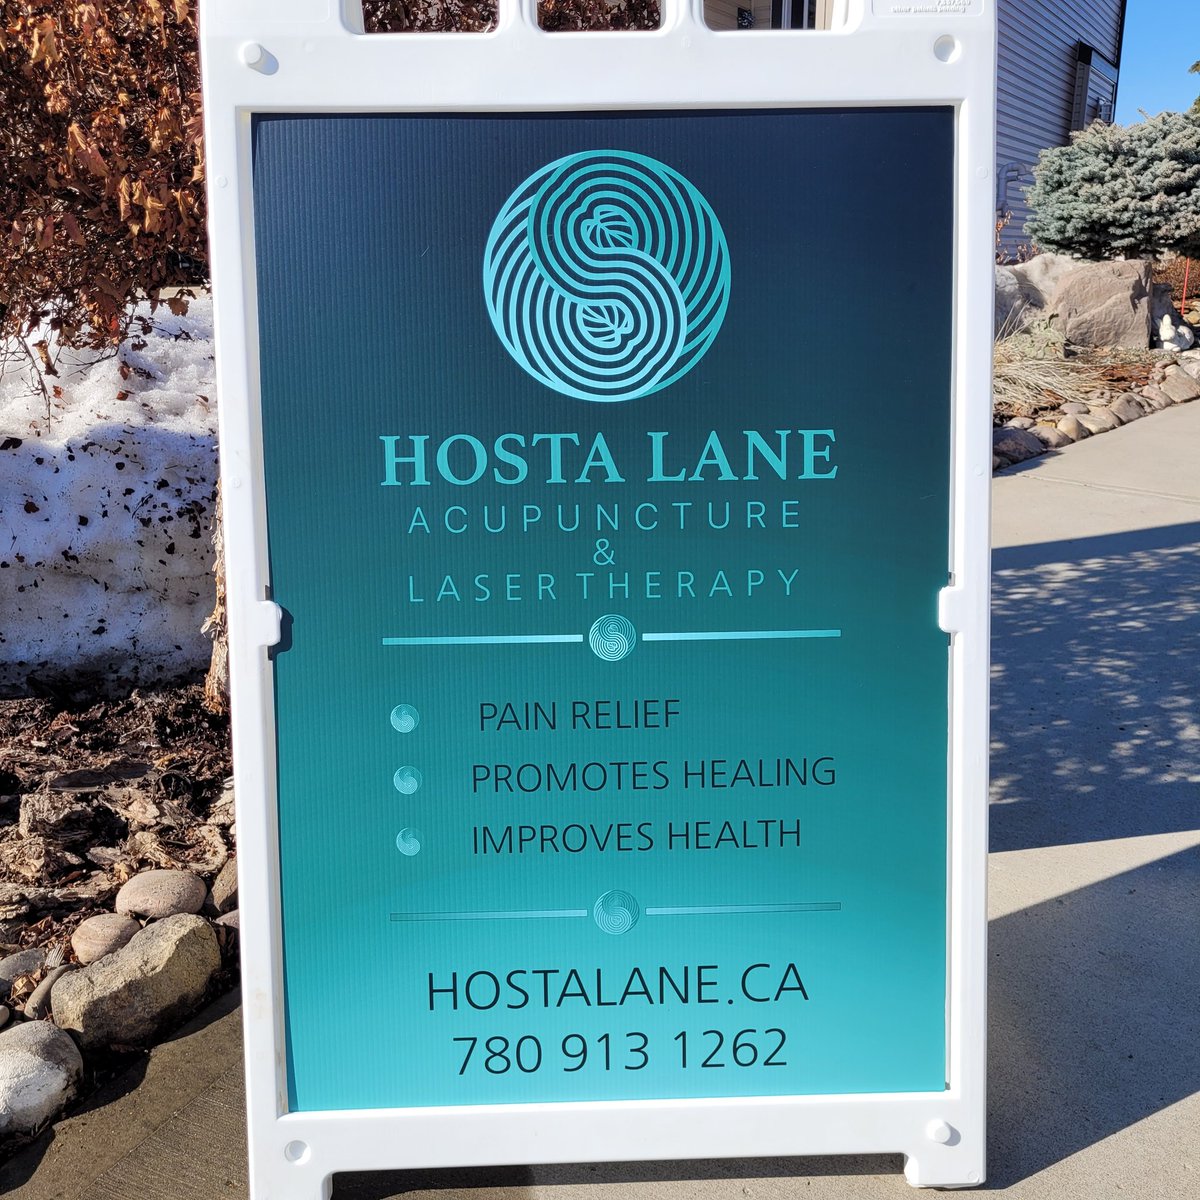 I got a new sign! 
Acupuncture & Laser Therapy!
Ancient wisdom with modern technology making for better healing outcomes. 
Sore backs welcome!
#YegAcupuncture #YegWellness
#SmallBusiness #ShopLocalYeg